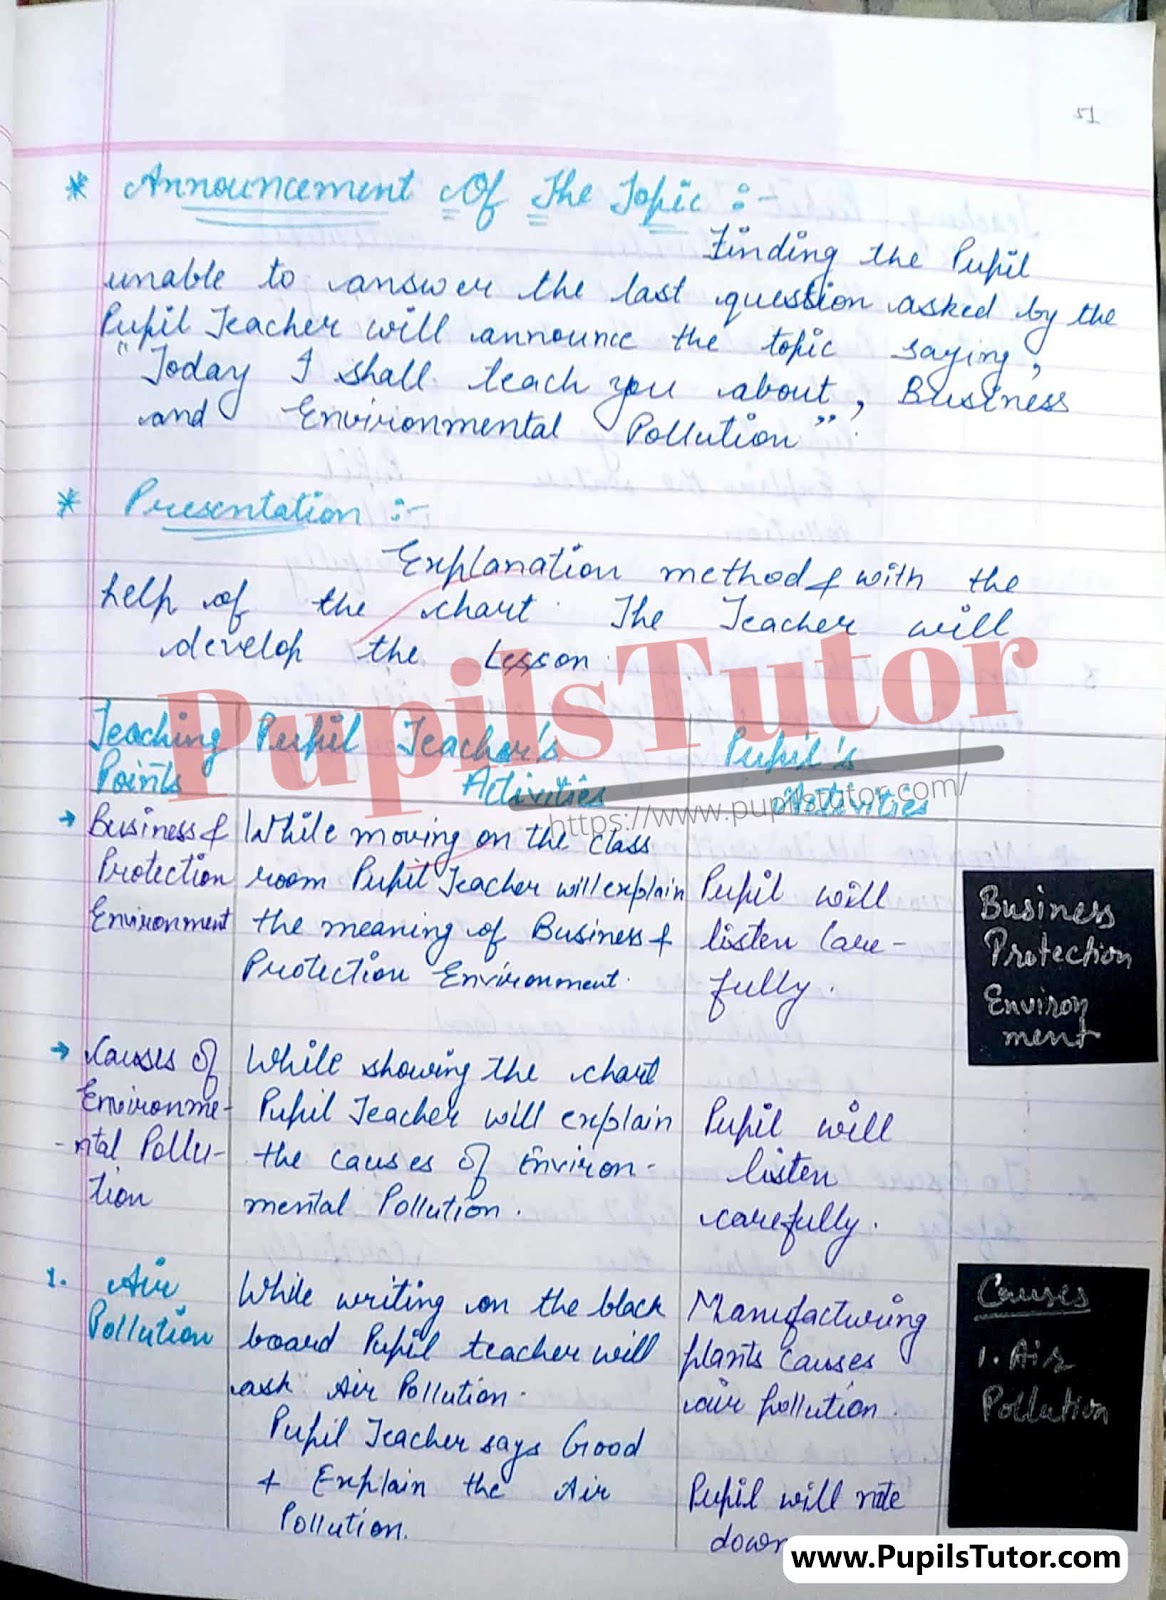 Class/Grade 12 Commerce Lesson Plan On Role Of Business In Environmental Protection For CBSE NCERT KVS School And University College Teachers – (Page And Image Number 3) – www.pupilstutor.com